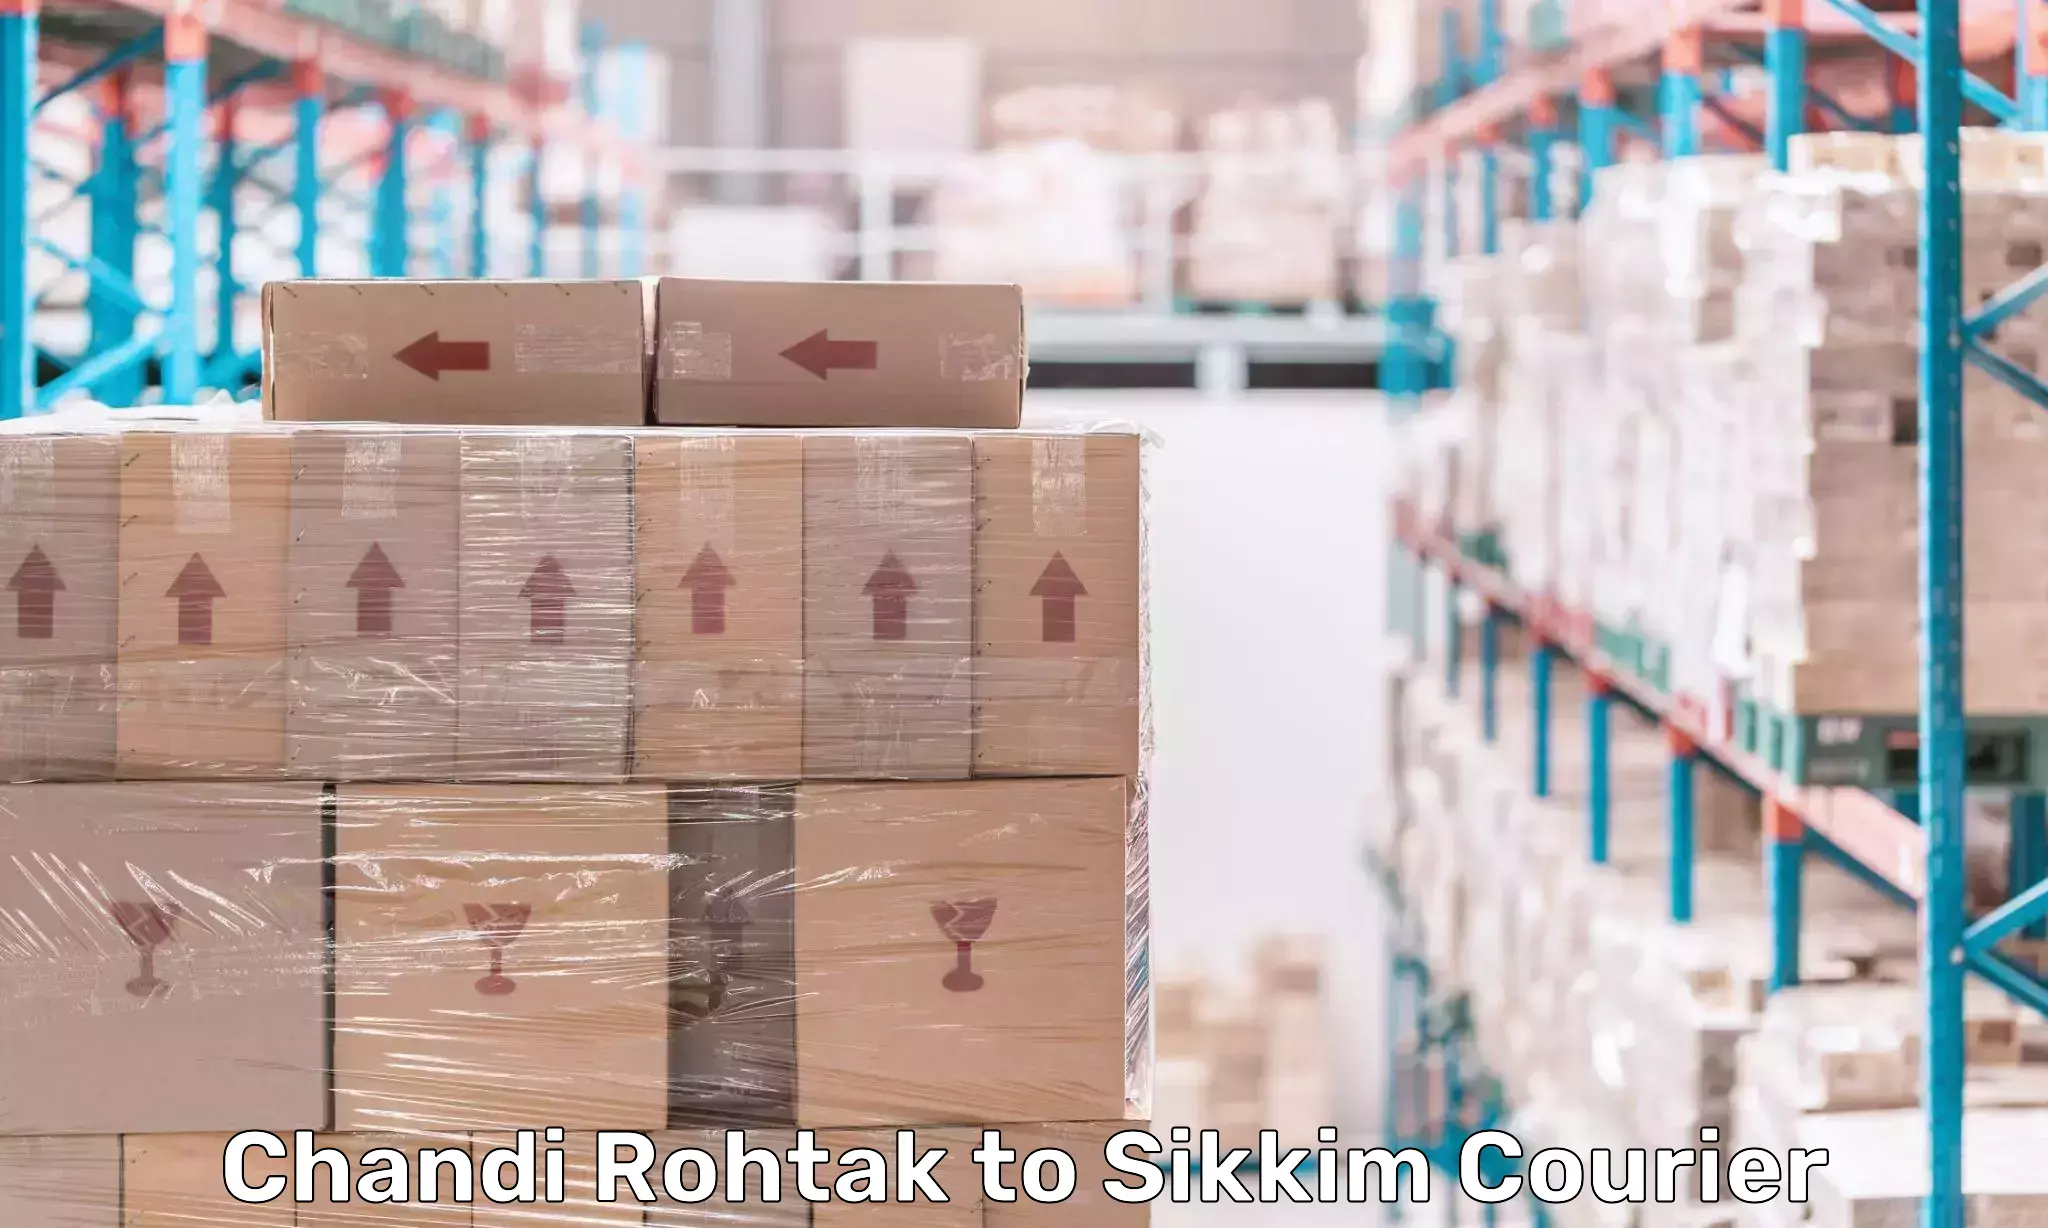 User-friendly delivery service Chandi Rohtak to East Sikkim